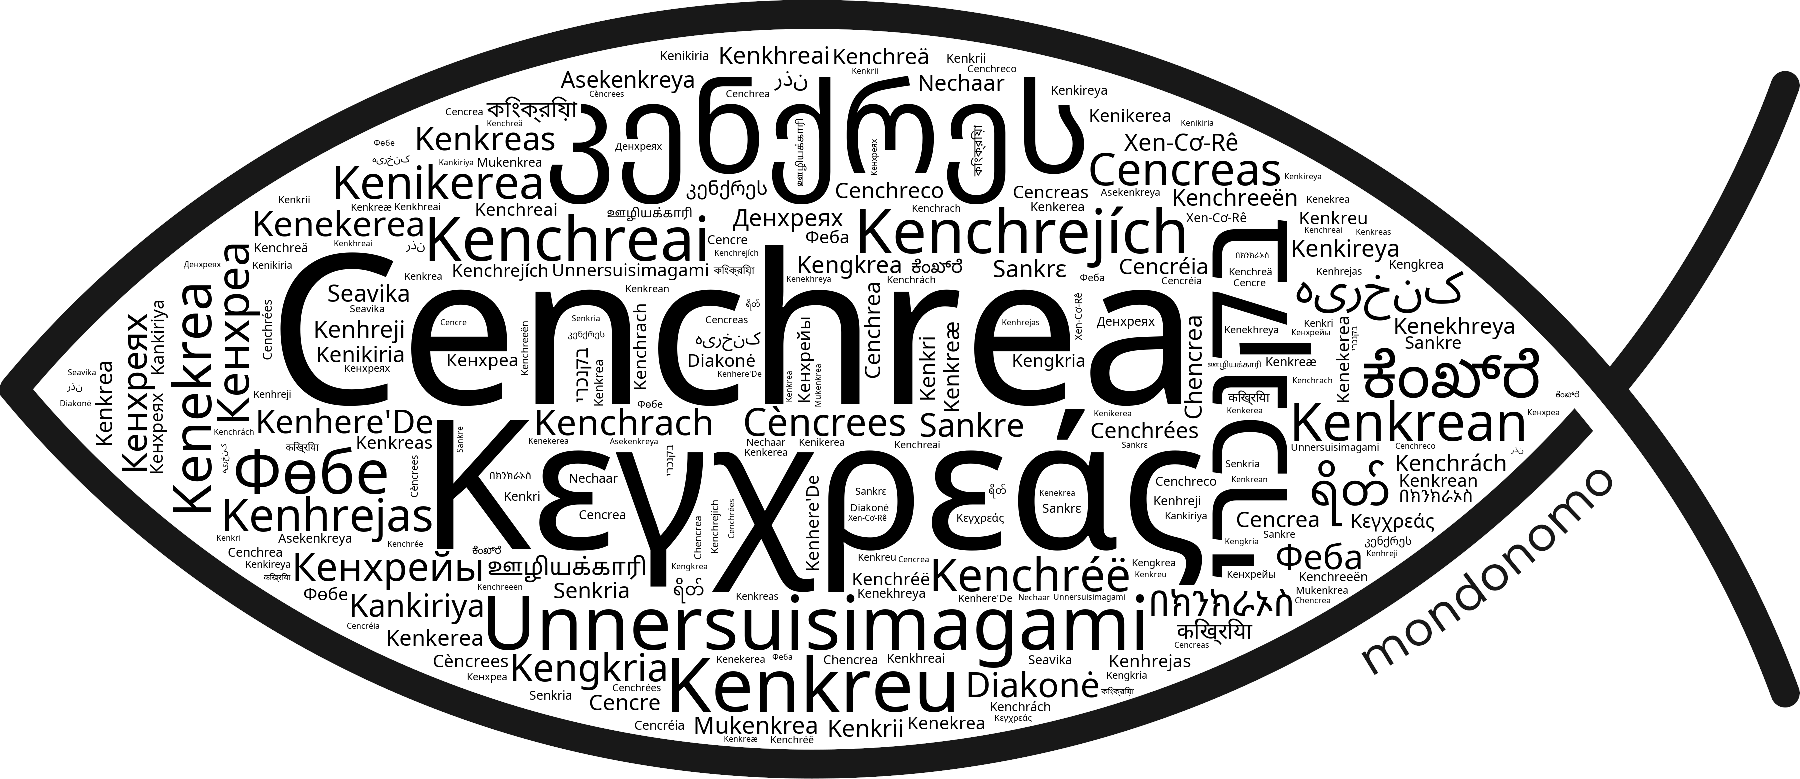 Name Cenchrea in the world's Bibles